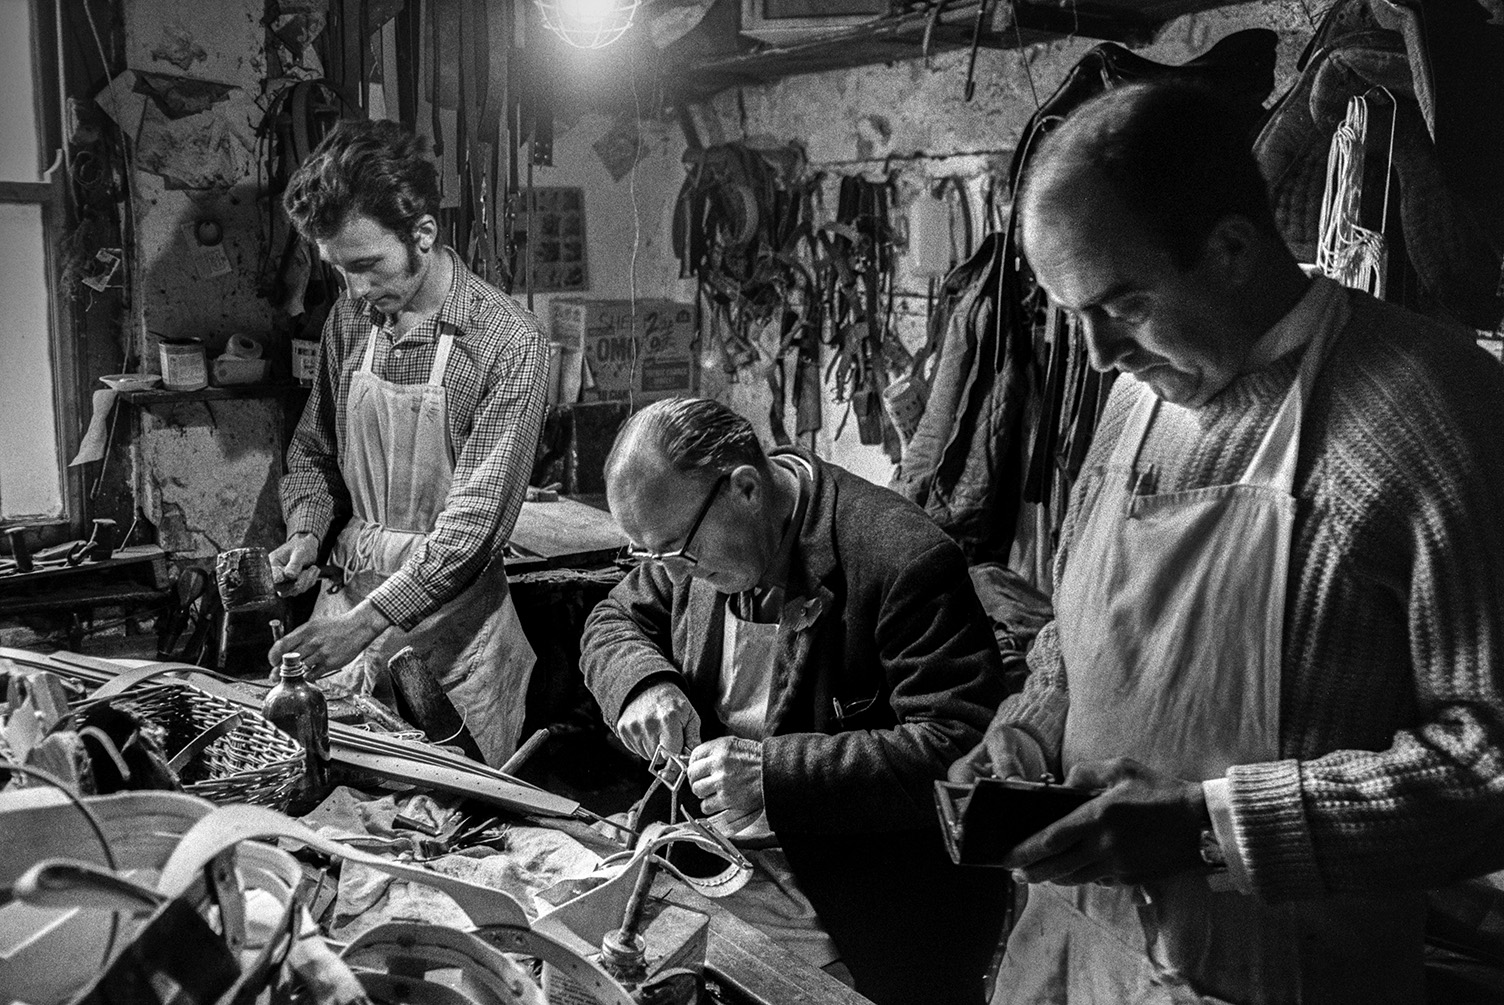 Three men including Walter Johns, sat at the workbench, Derek Johns, on the right and Mr Bowden, on the left, working on leather goods in their saddlery workshop in Bideford. Various ropes and tools can be seen in the workshop.